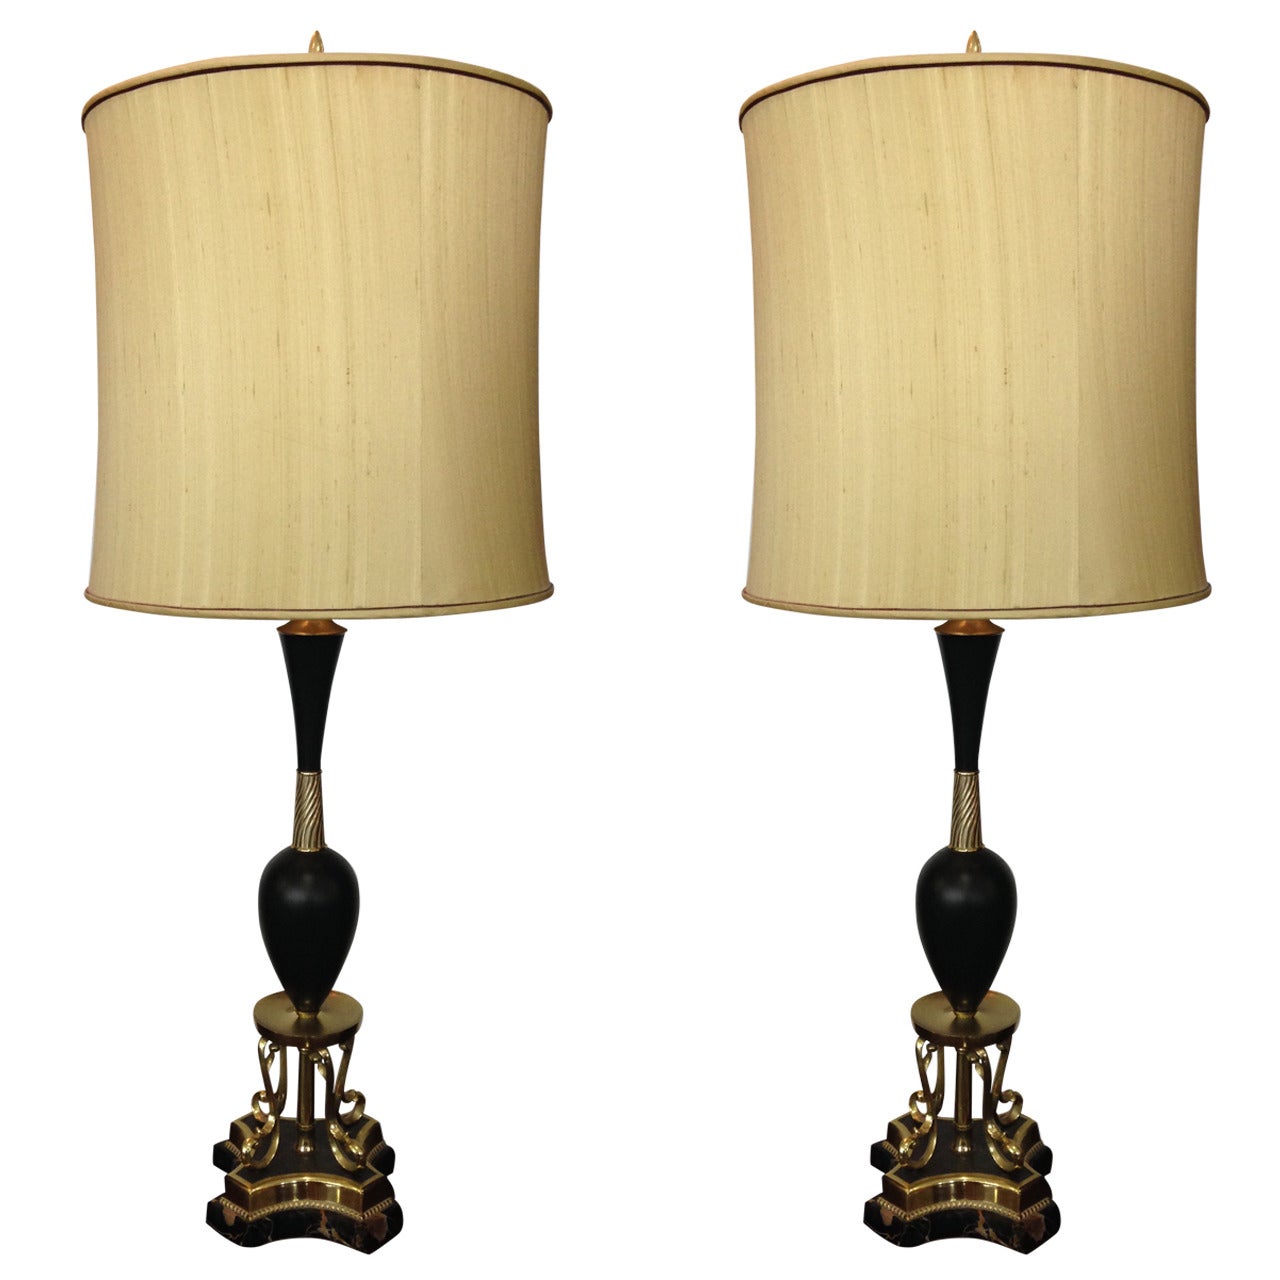 Pair of Hollywood Regency Brass and Black Marble Rembrandt Table Lamps